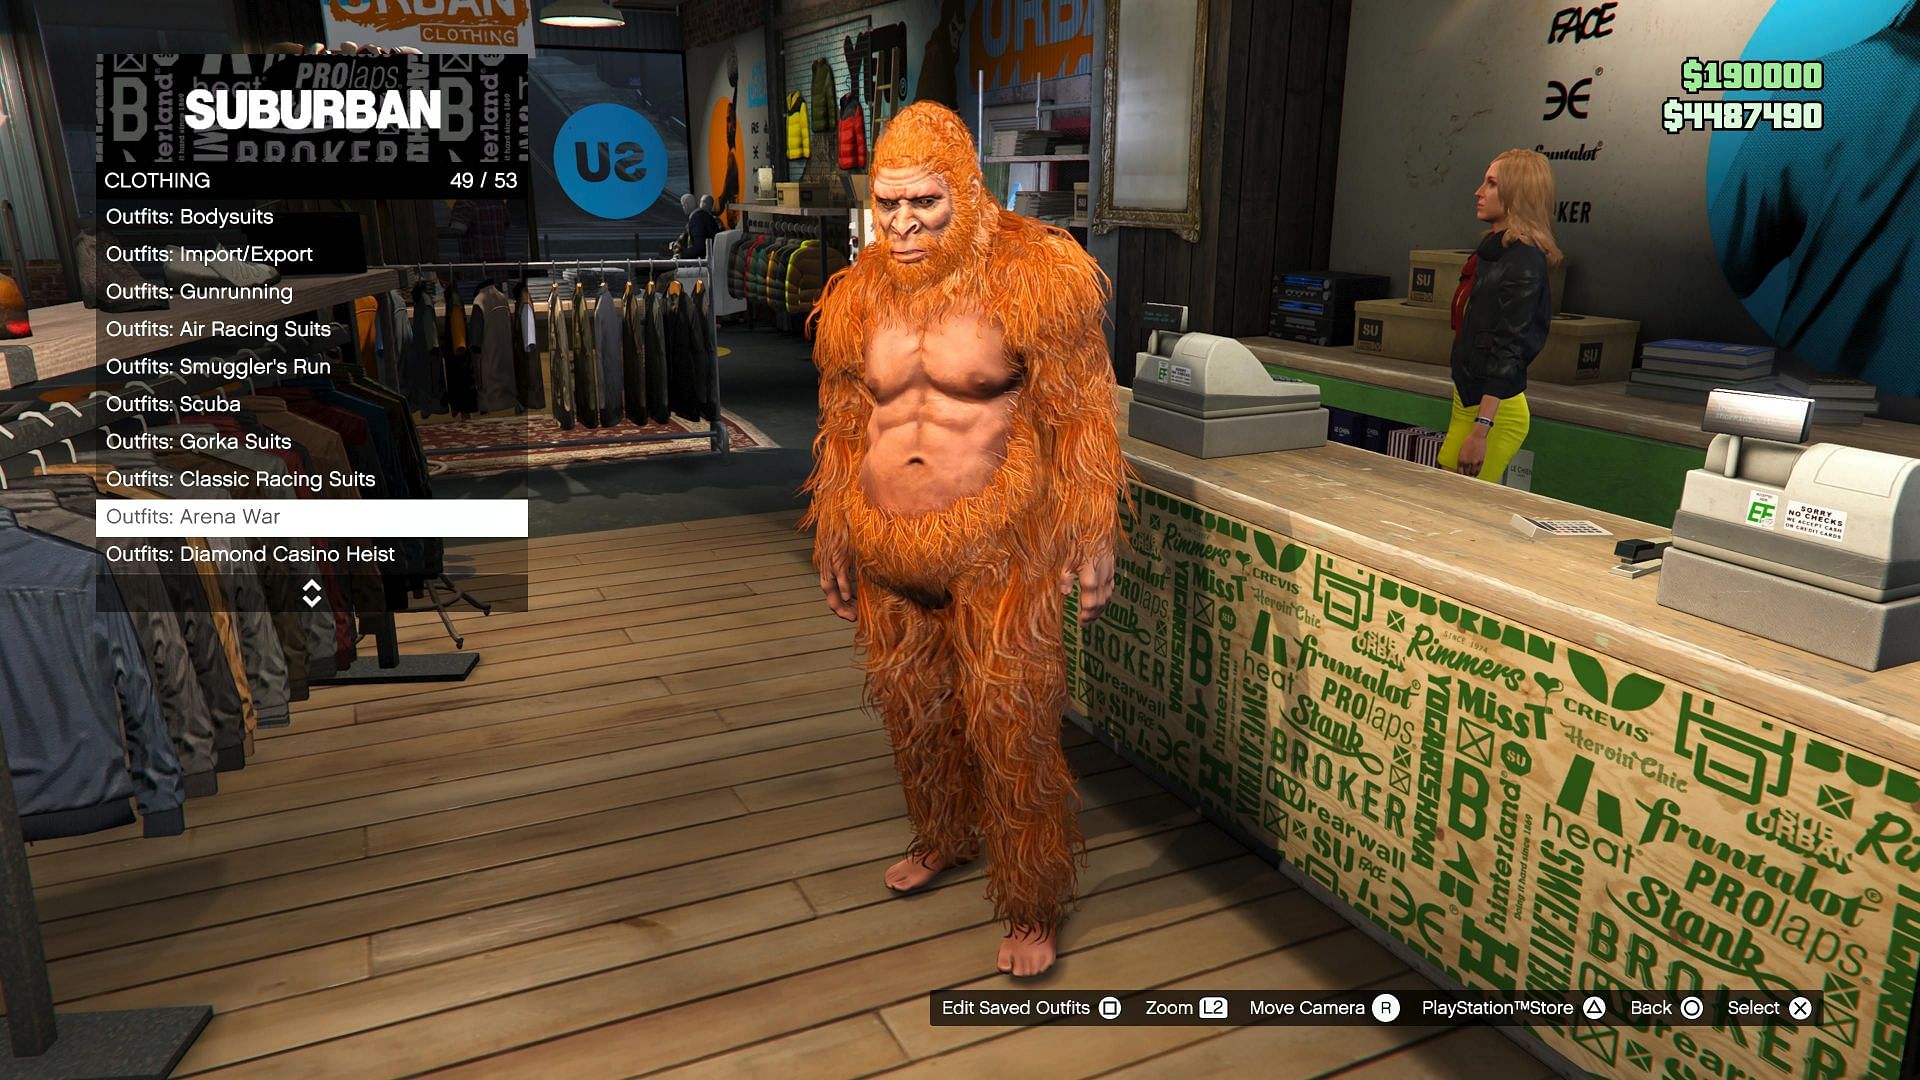 Buying it from a clothing shop is the easiest way (Image via Rockstar Games)